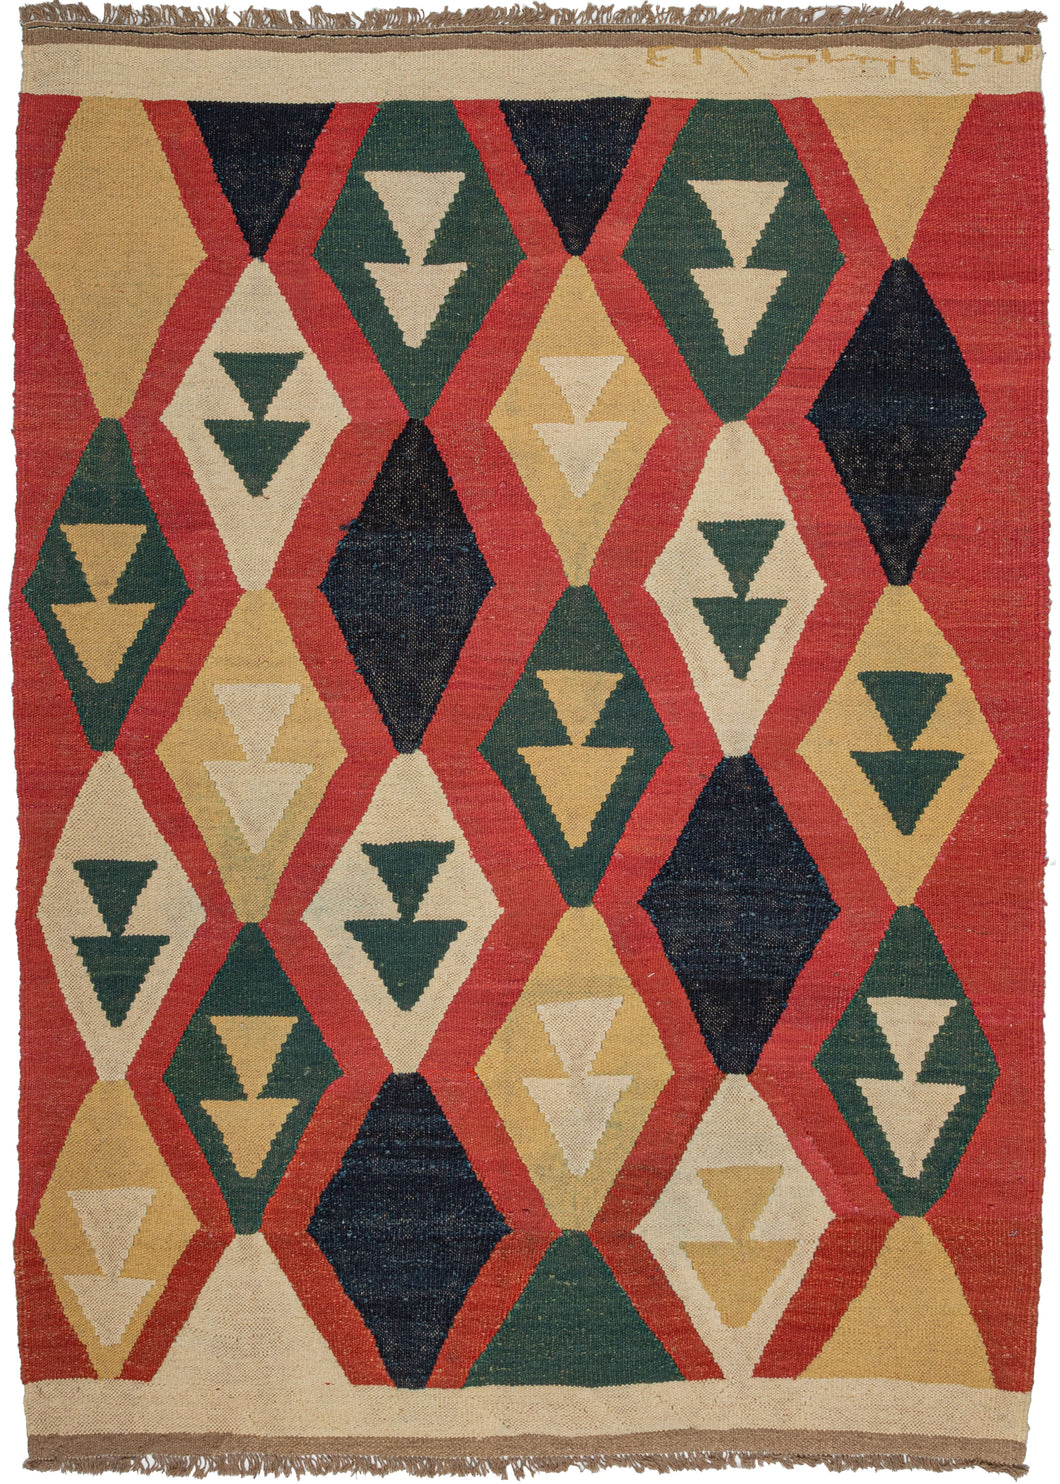 This Contemporary N Persian Kilim features vertical columns of diamonds in yellow, green, ivory, and navy on red ground. The columns are staggered with most but all containing two stacked triangles which may be an abstraction of a vase or vegetal form. It is finished with a block of undyed ivory wool at the top and bottom. 